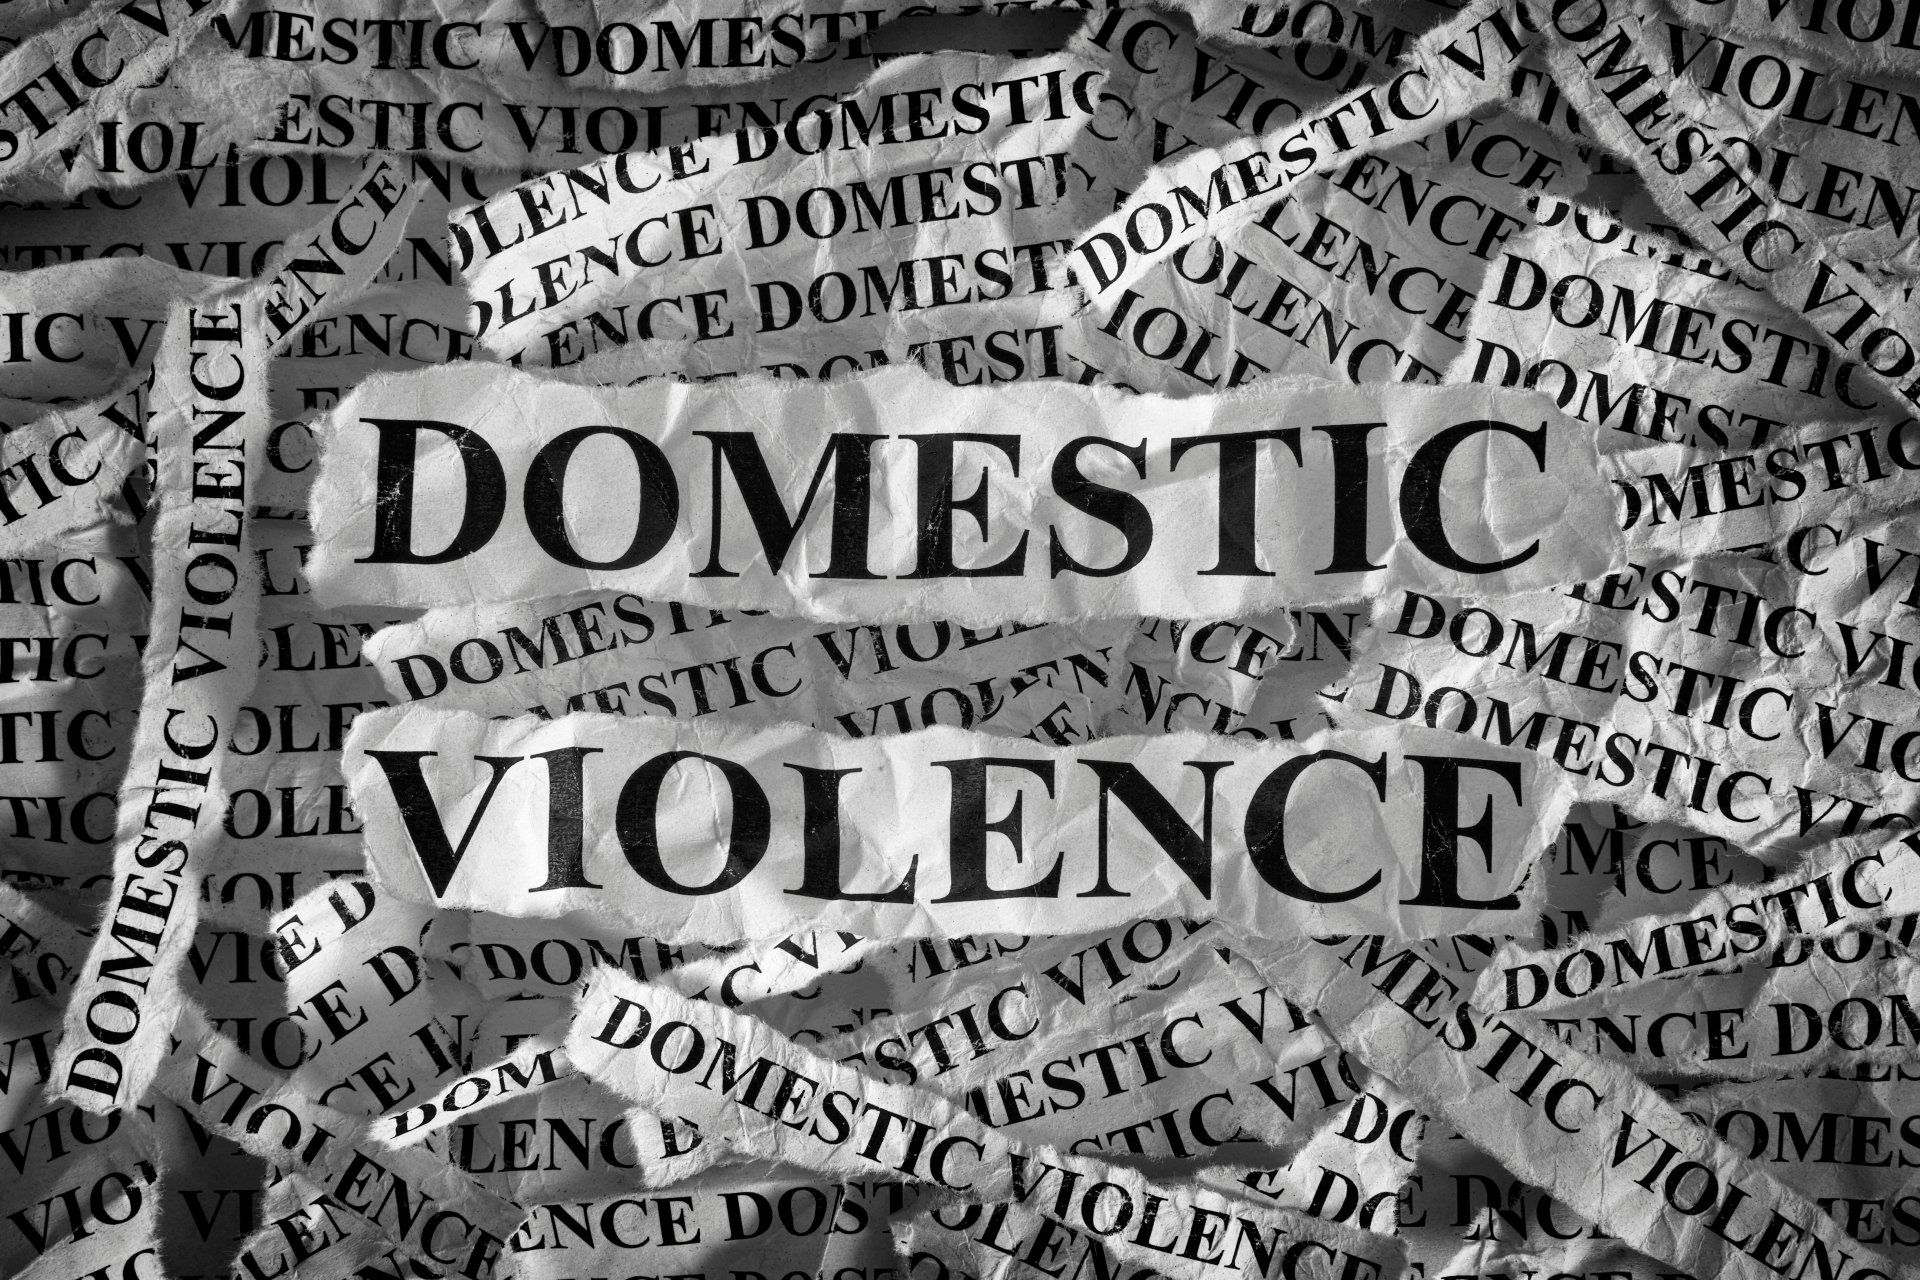 Coronavirus Shelter in Place Orders have increased Domestic Violence